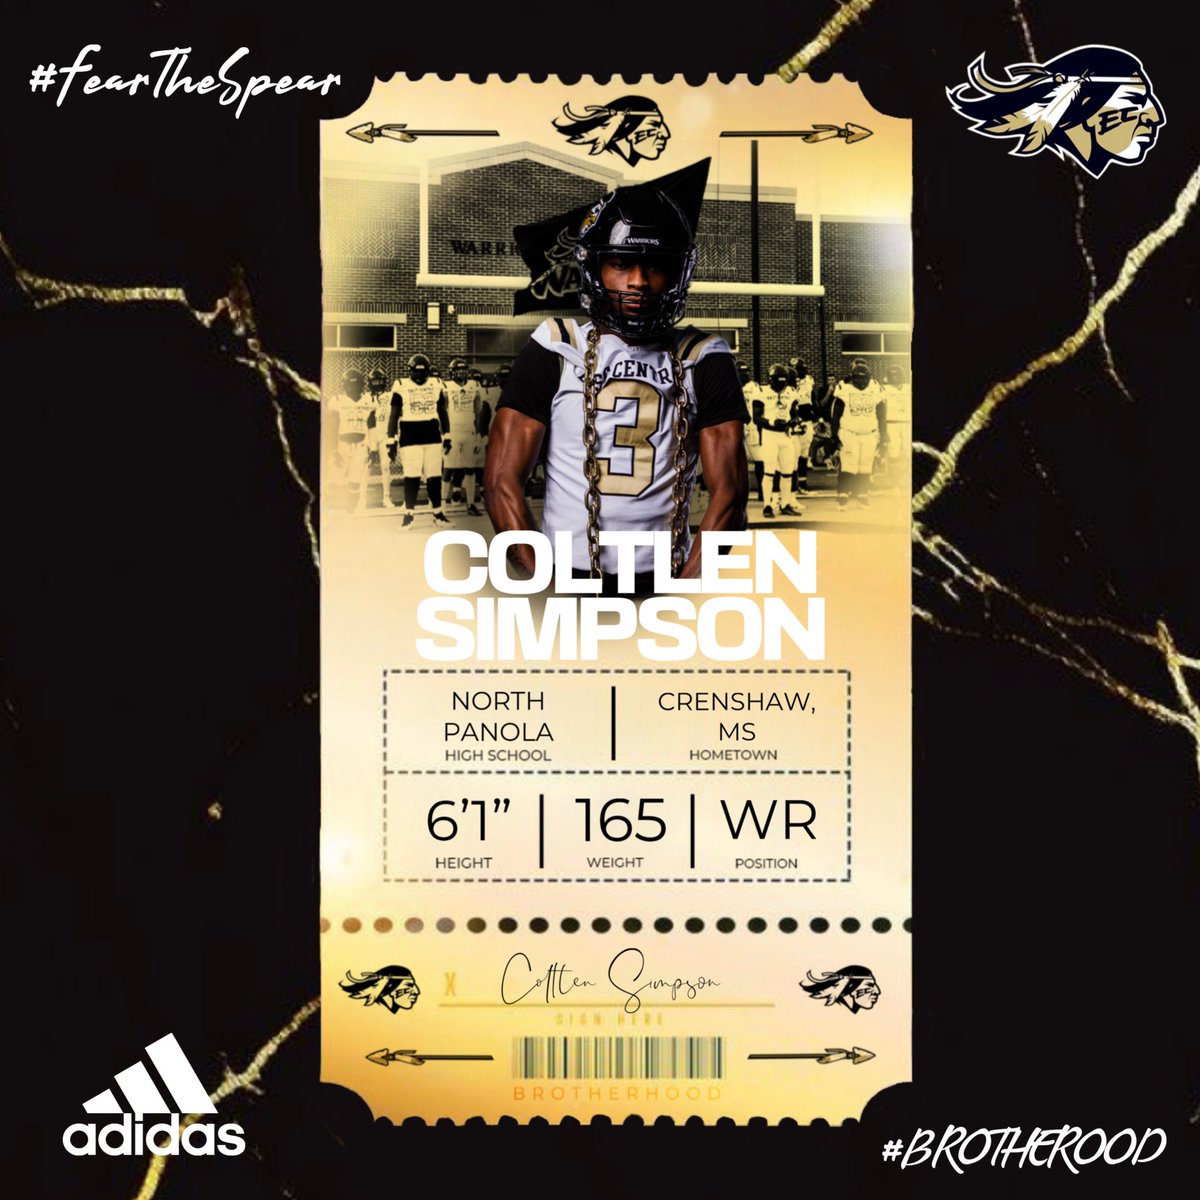 SPEEDY WR from North Panola!! @CodySimp3k has punched his ticket to join the Brotherhood!! #BROTHERHOOD X #FearTheSpear